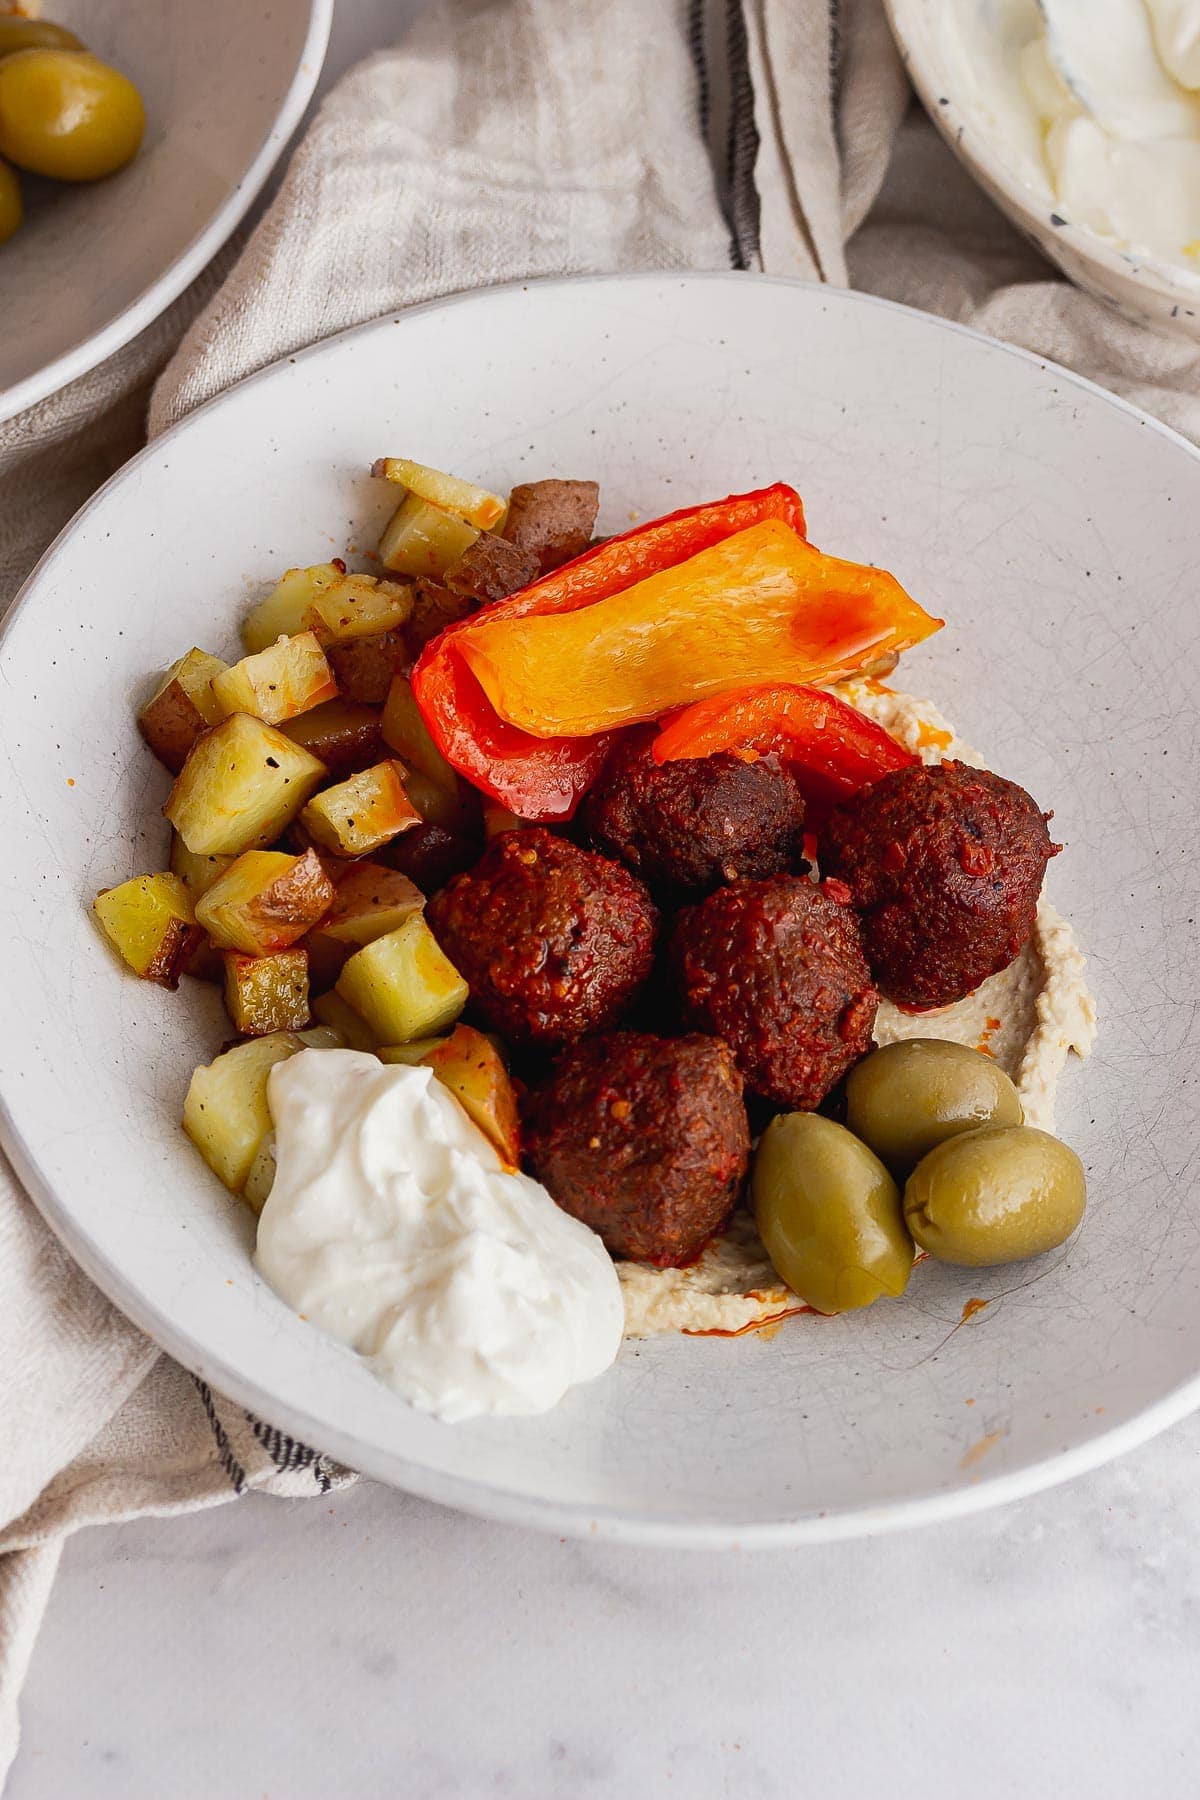 Meatballs and olives in a white bowl